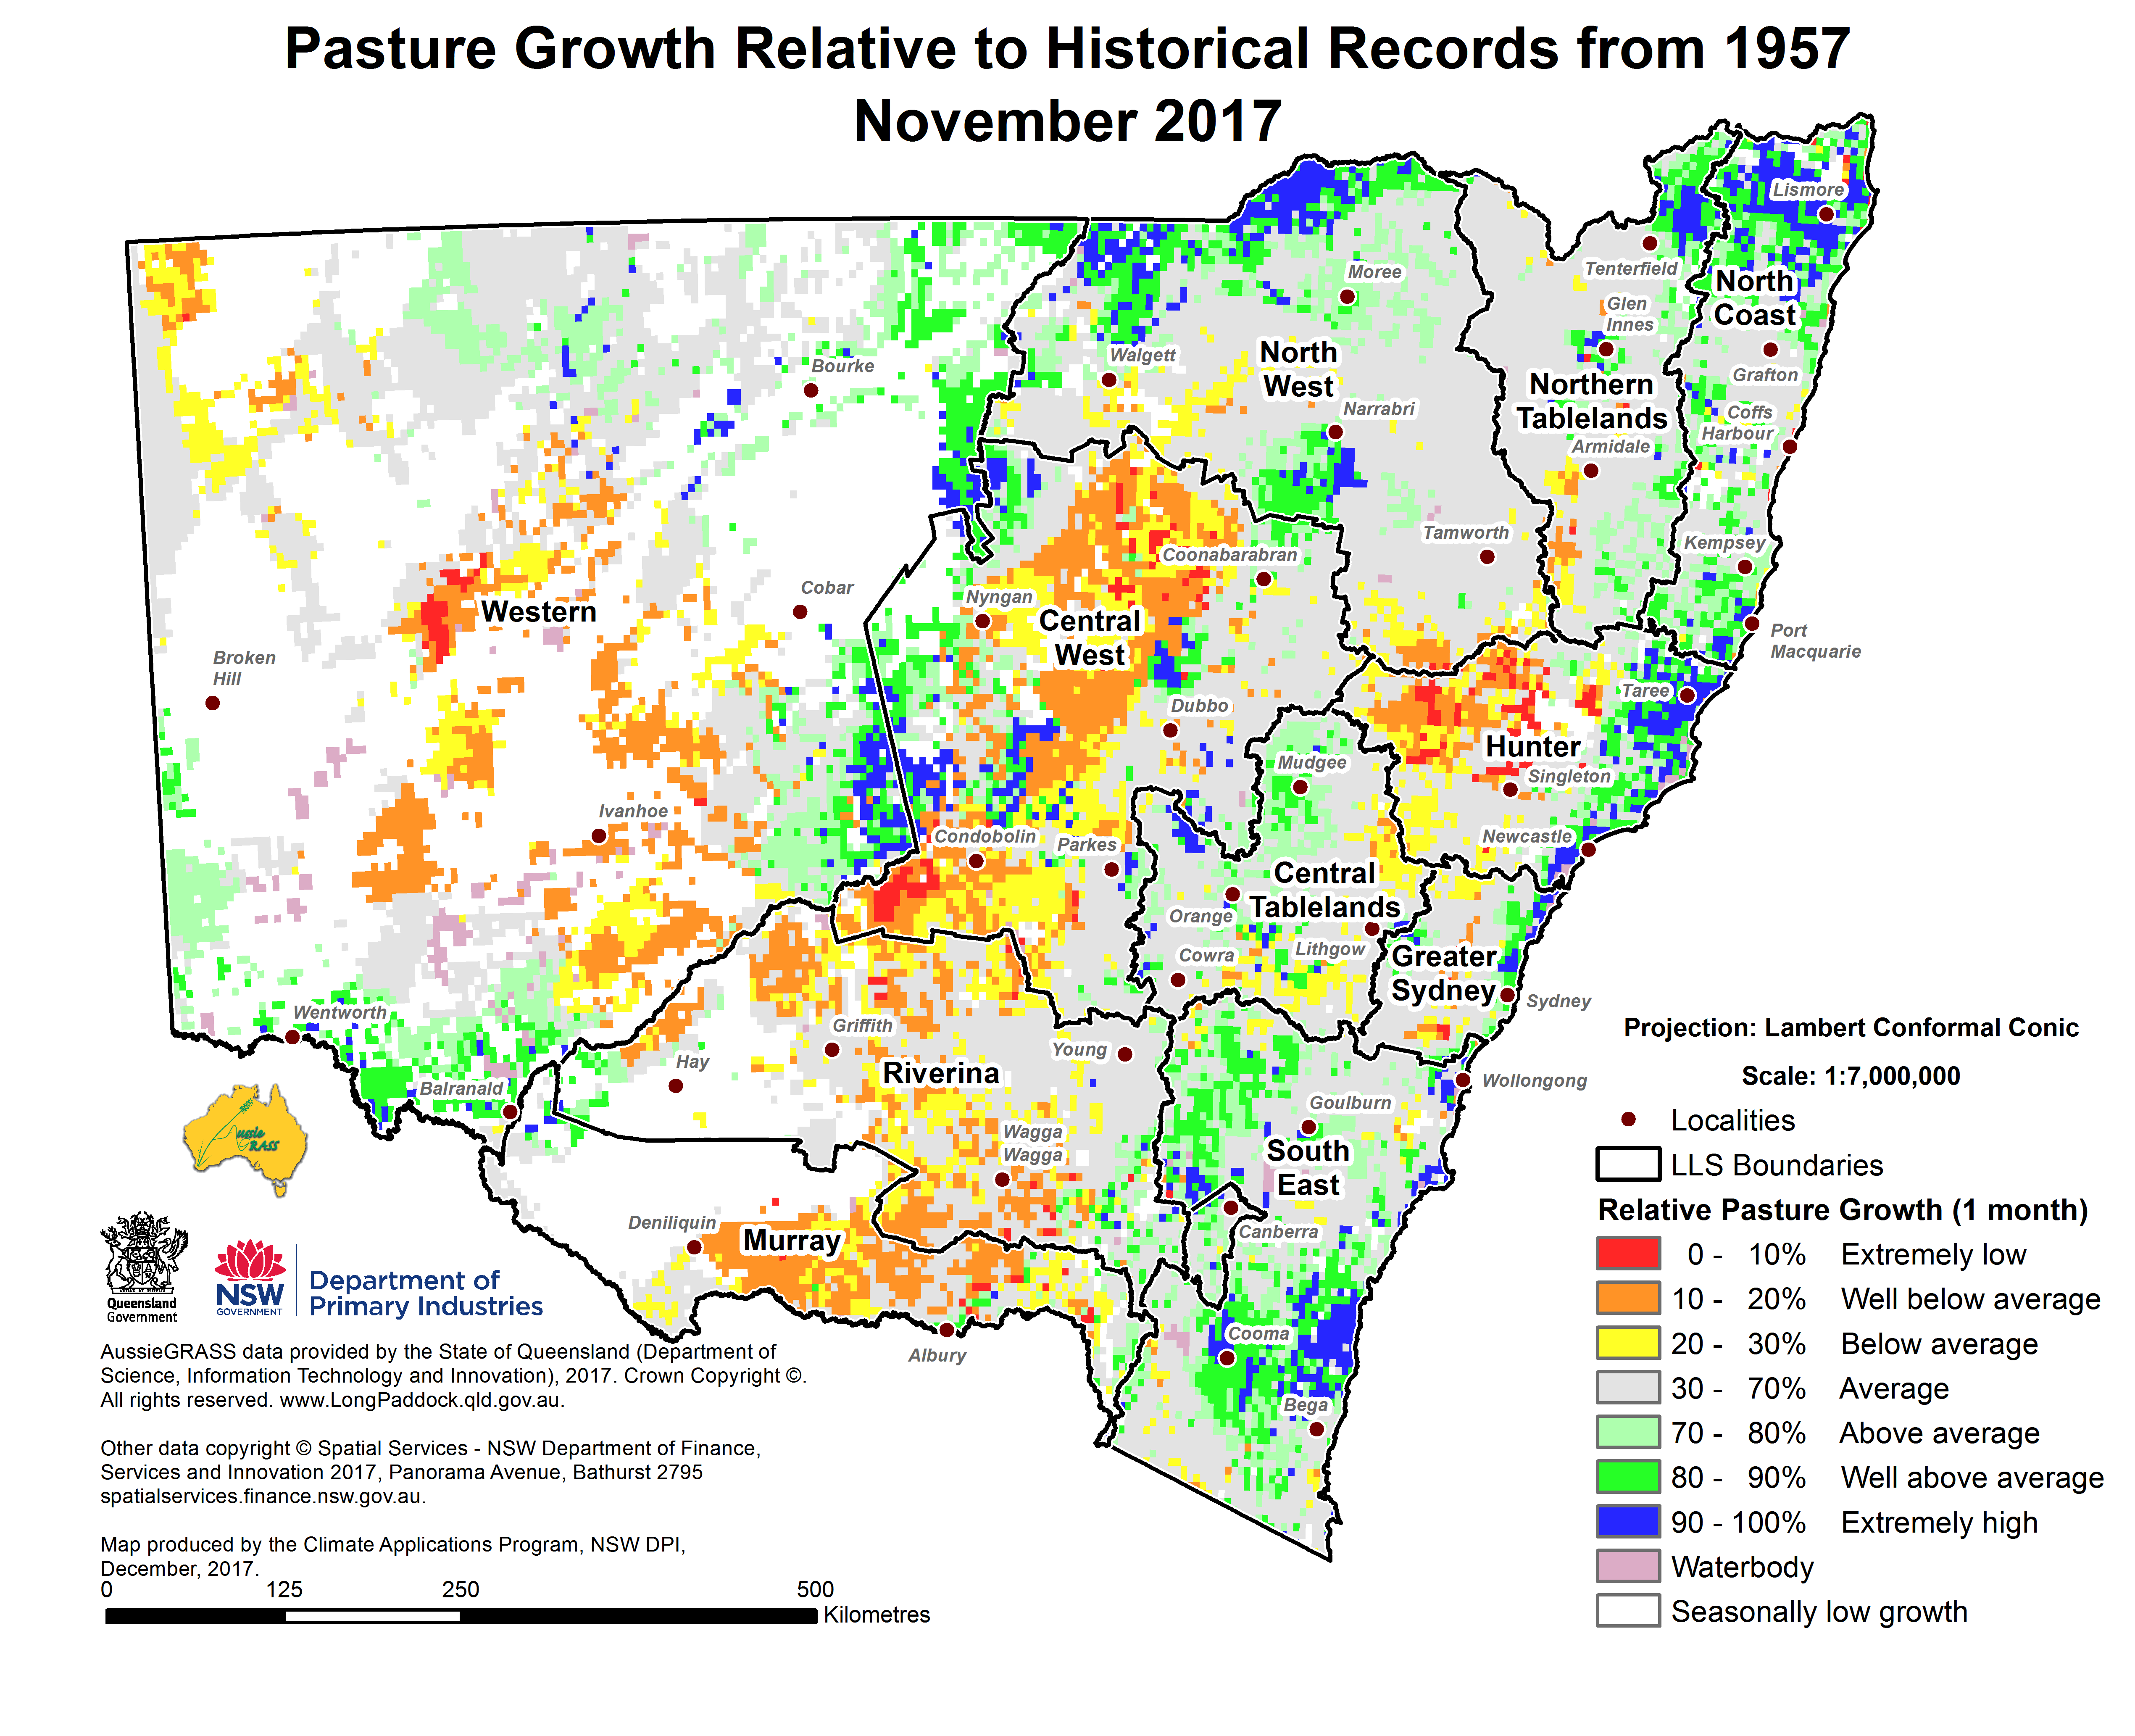 map of pasture growth relative to historical records from 1957 to November 2017